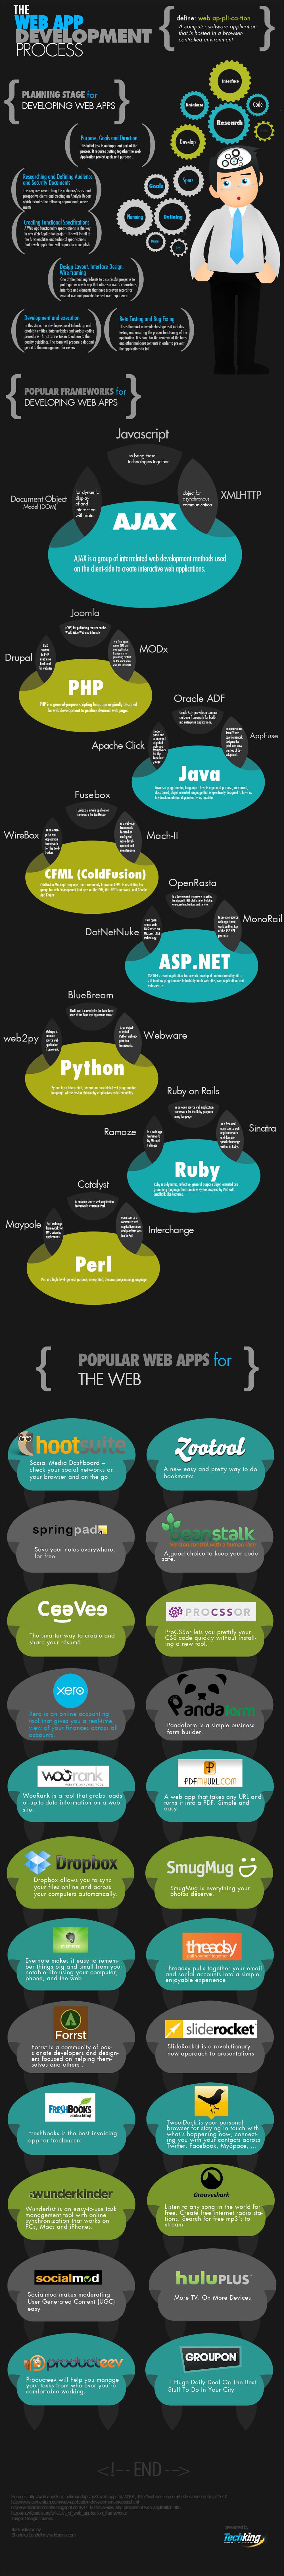 The Web App Development Process Explained In Detail [Infographic]